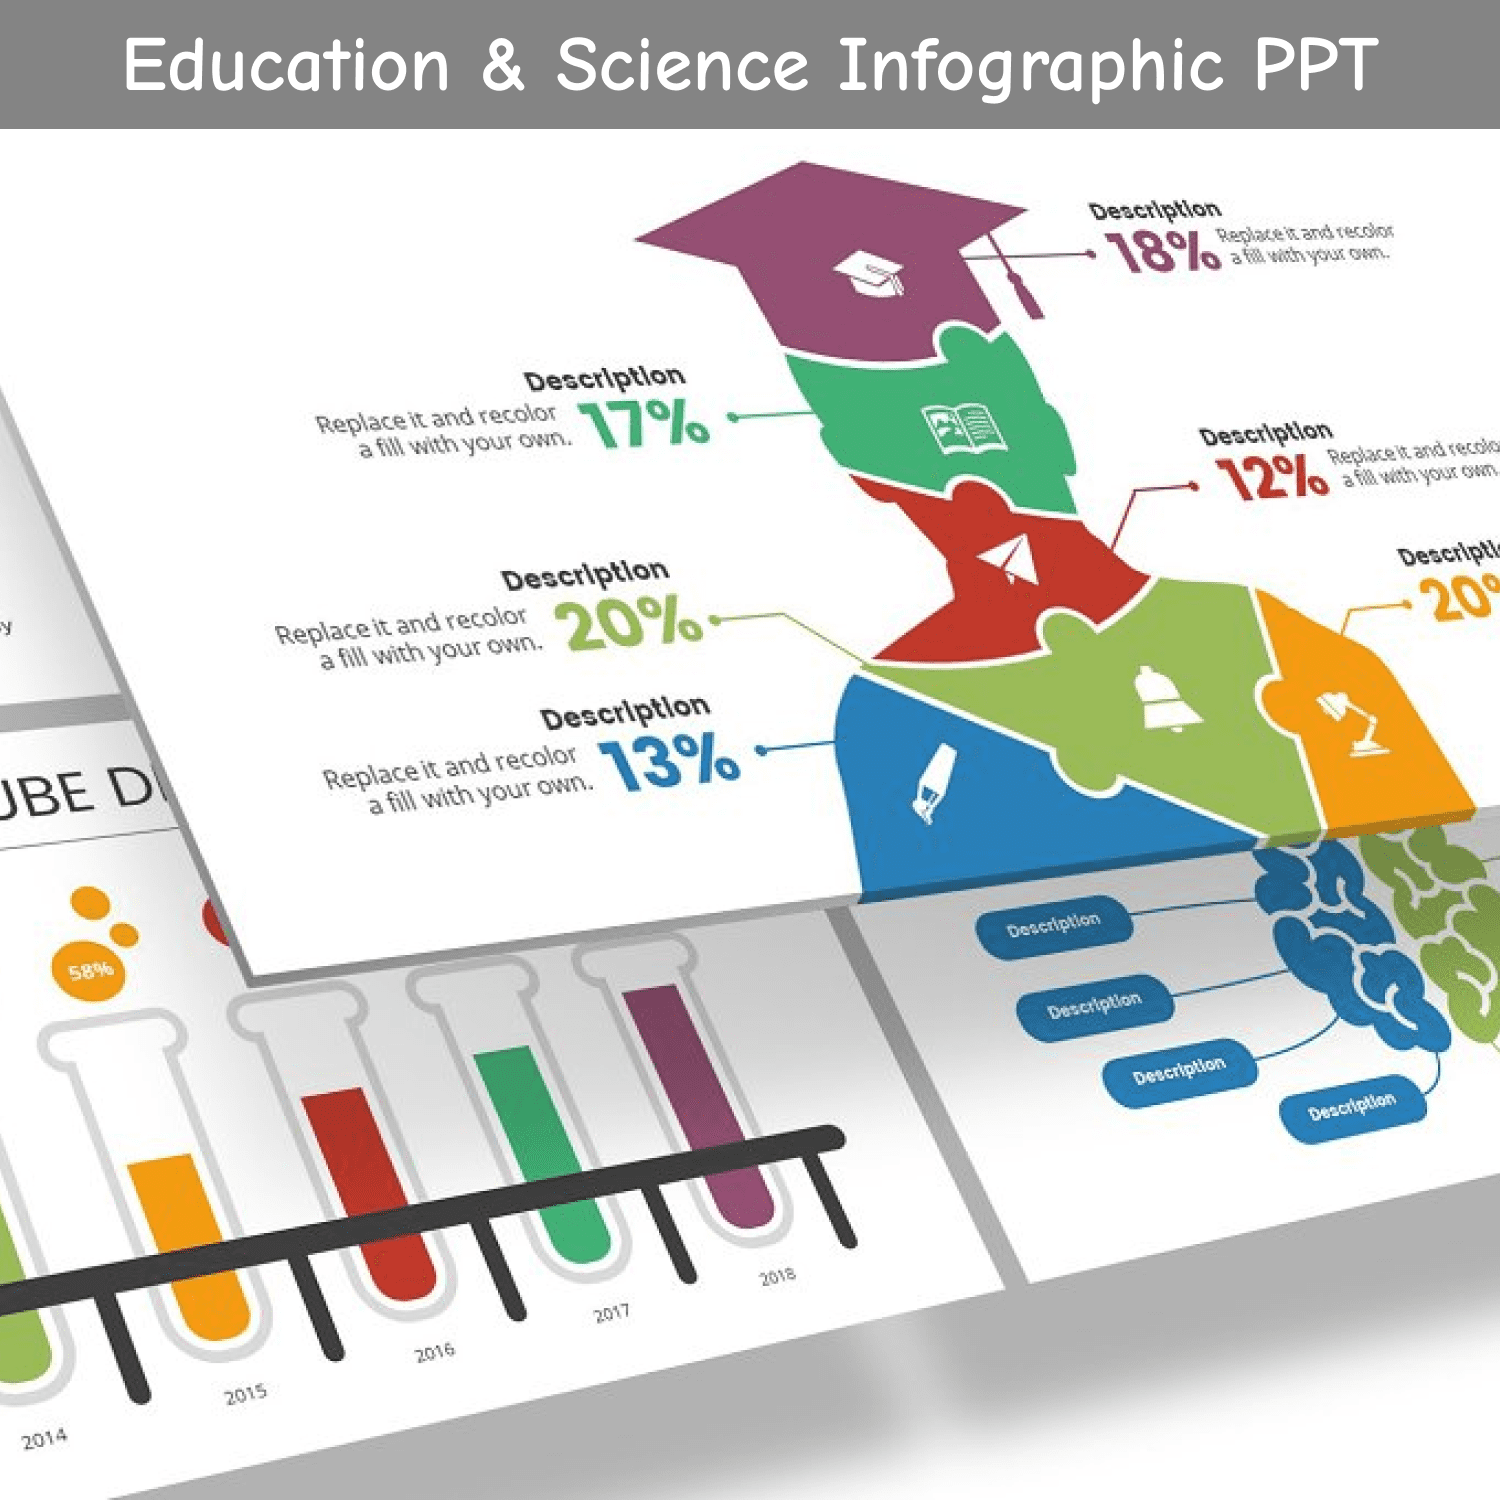 education science infographic ppt cover image.